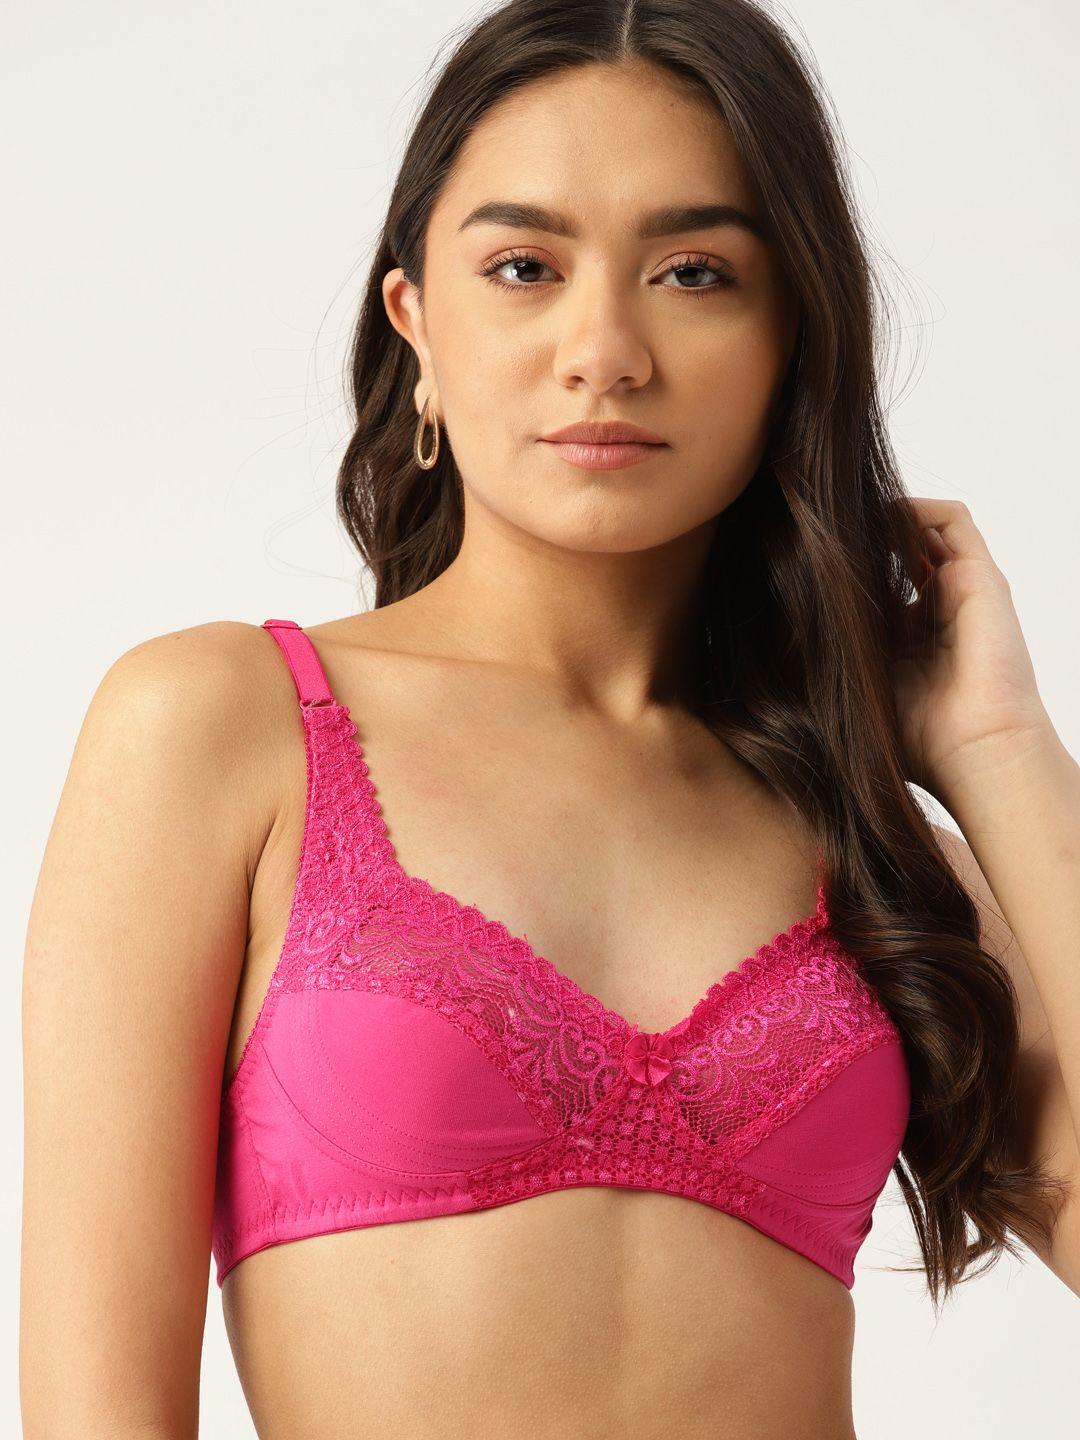 dressberry-pink-solid-t-shirt-bra-with-lace-detail-db-bf-newelc-new8